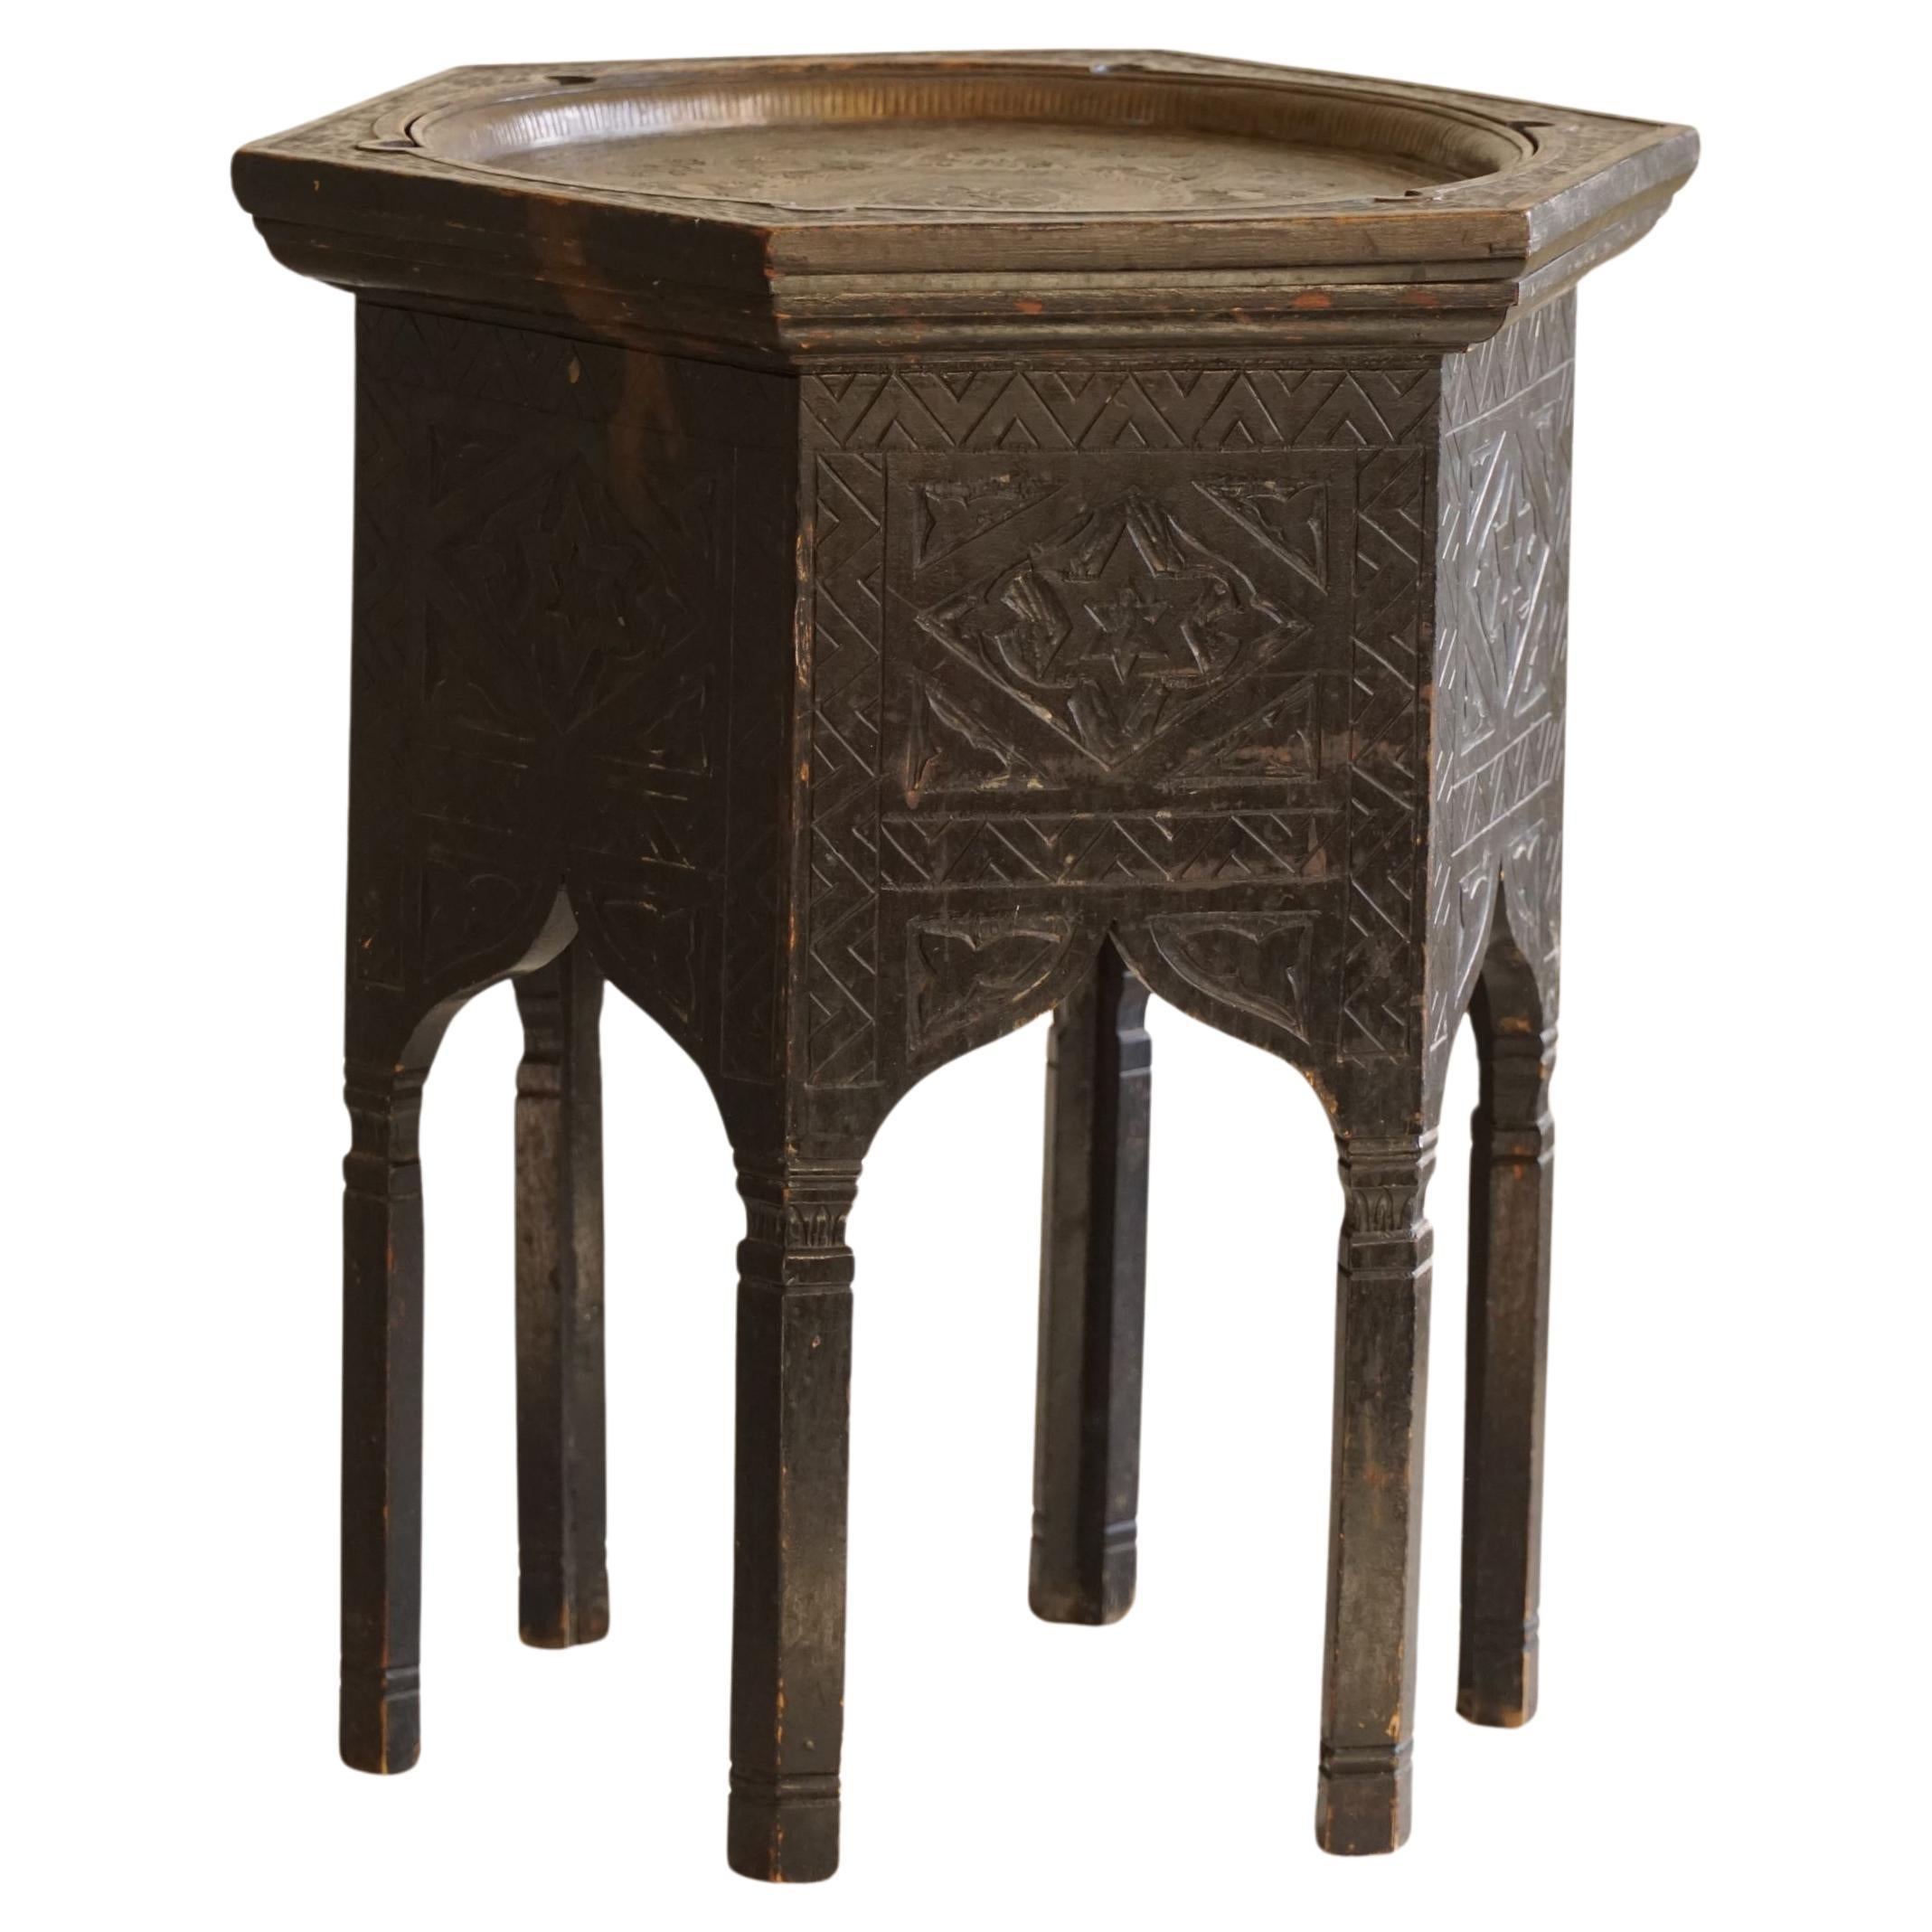 Anglo-Indian, Hardwood Side Table in Hexagon Shape, Late 19th Century